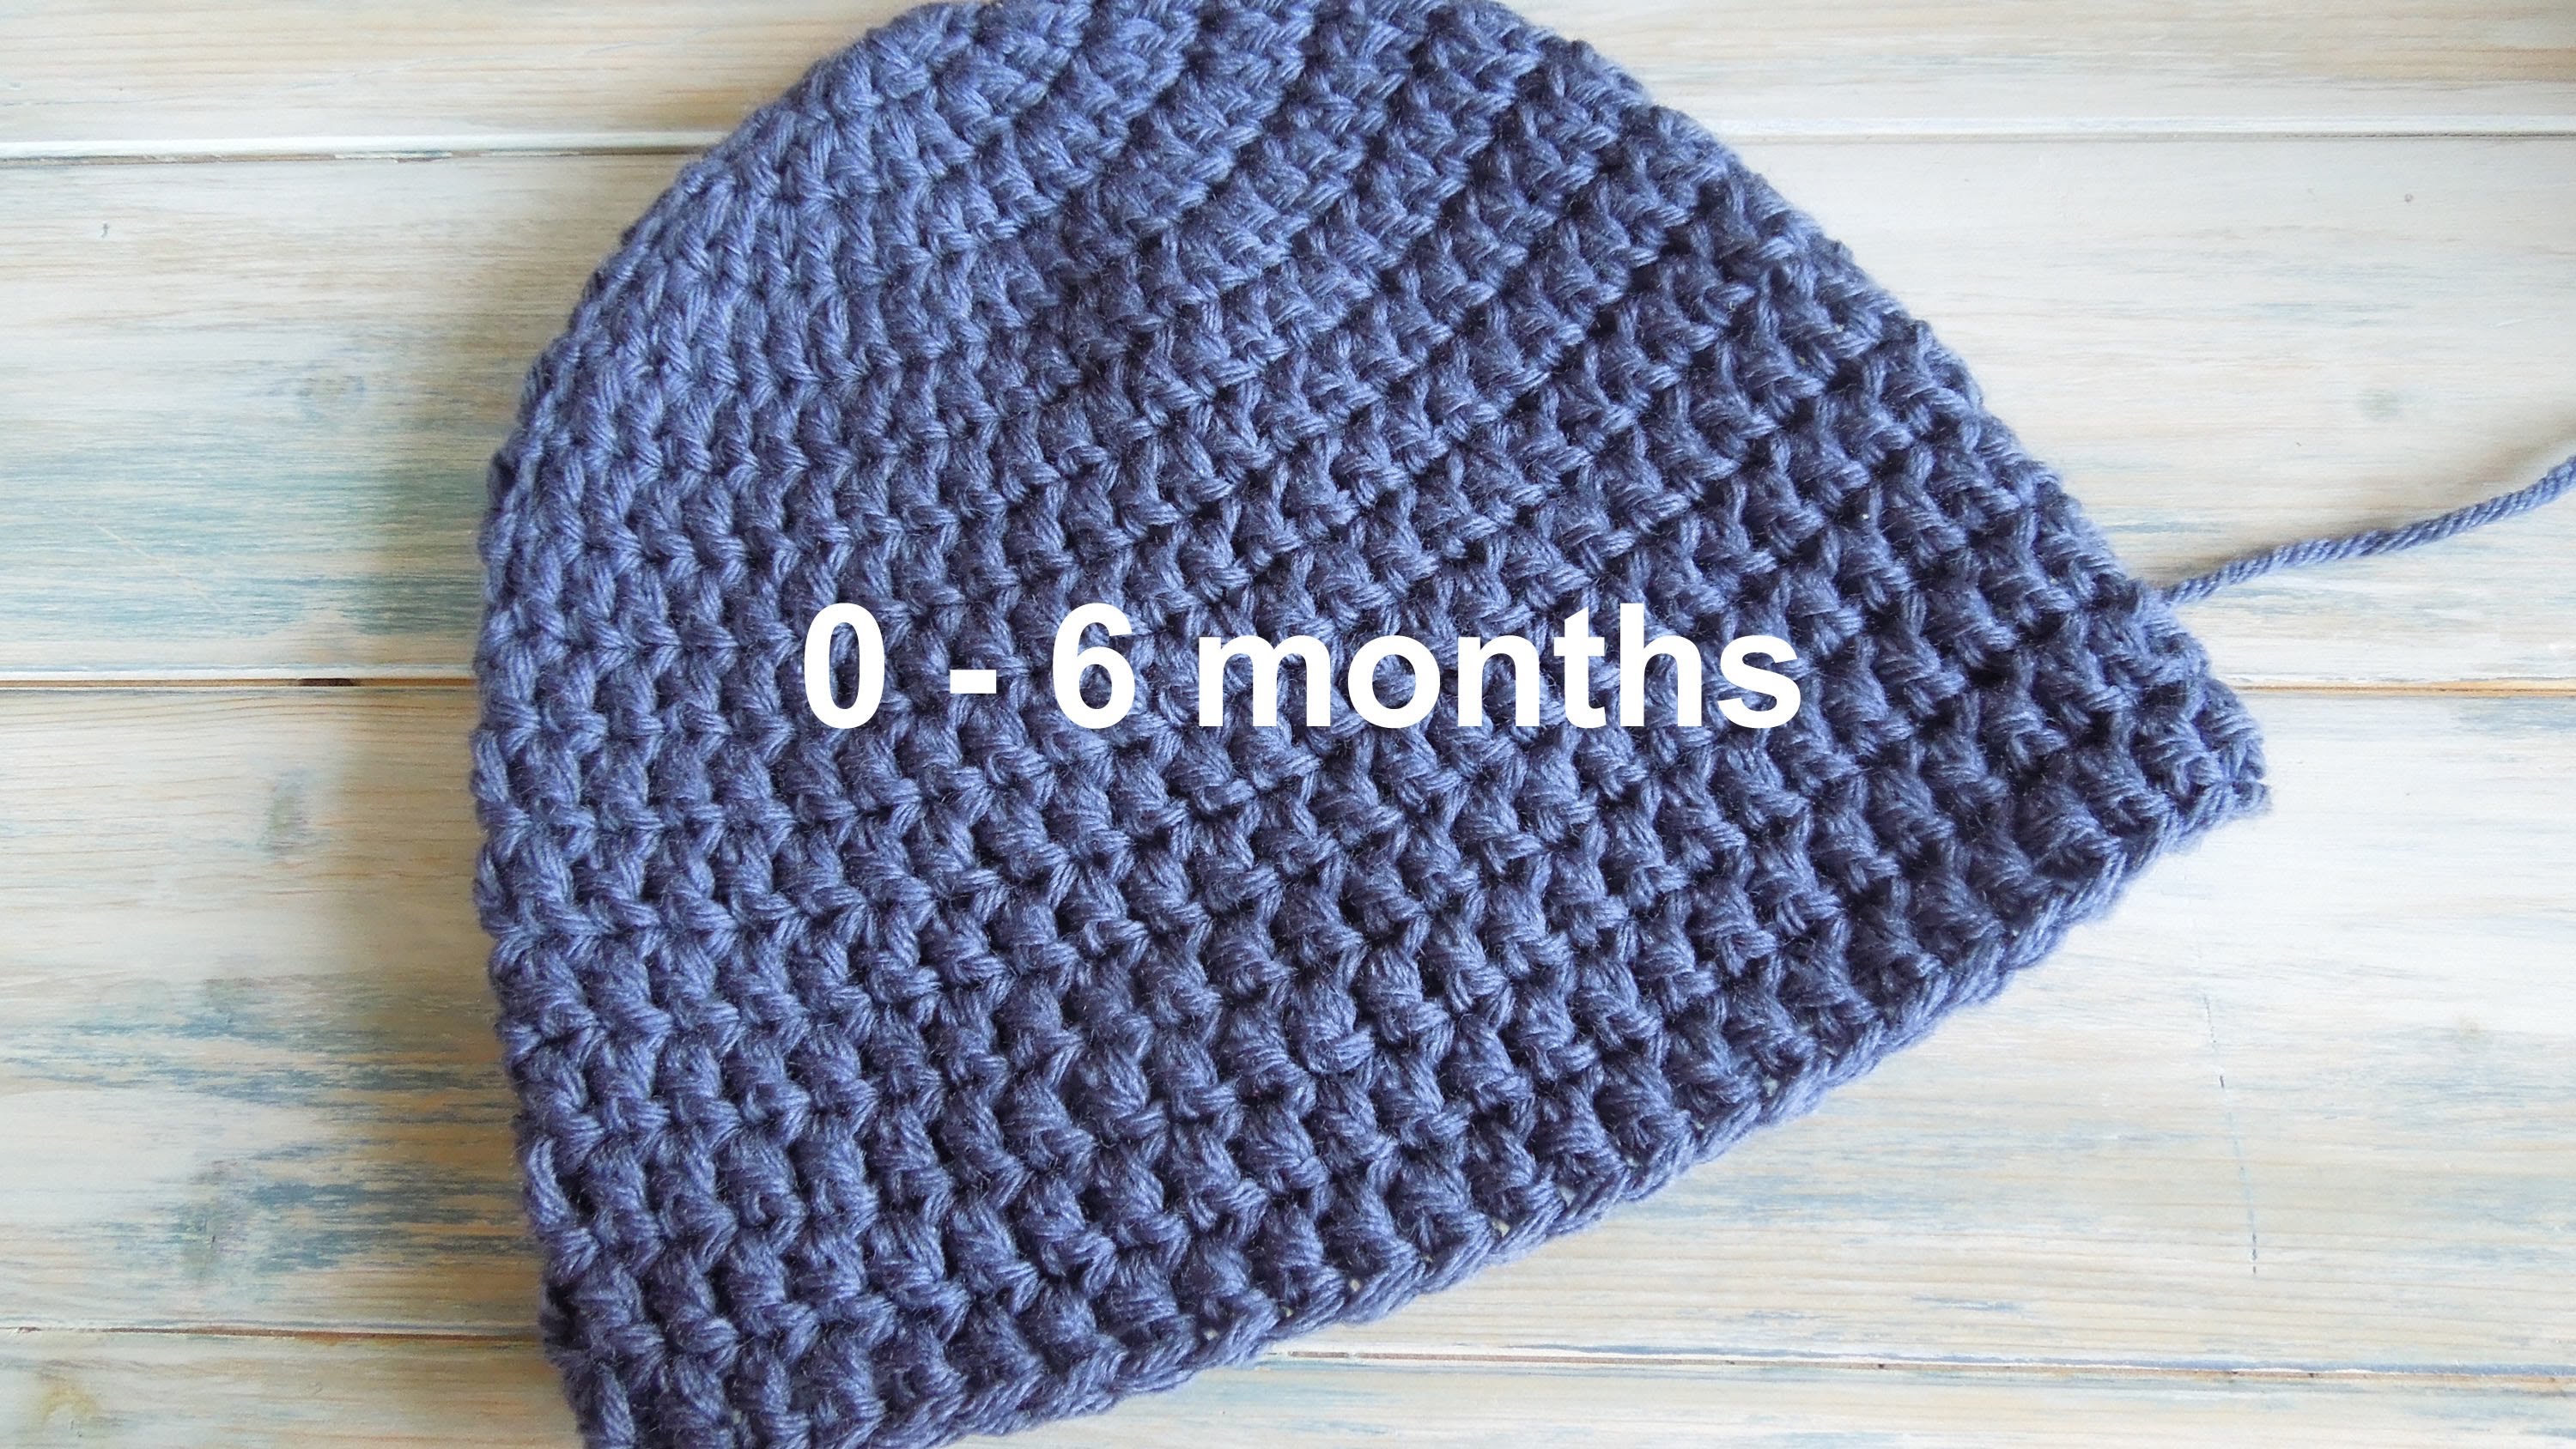 baby crochet hats (crochet) how to - crochet a simple baby beanie for 0-6 months - youtube BYLODET